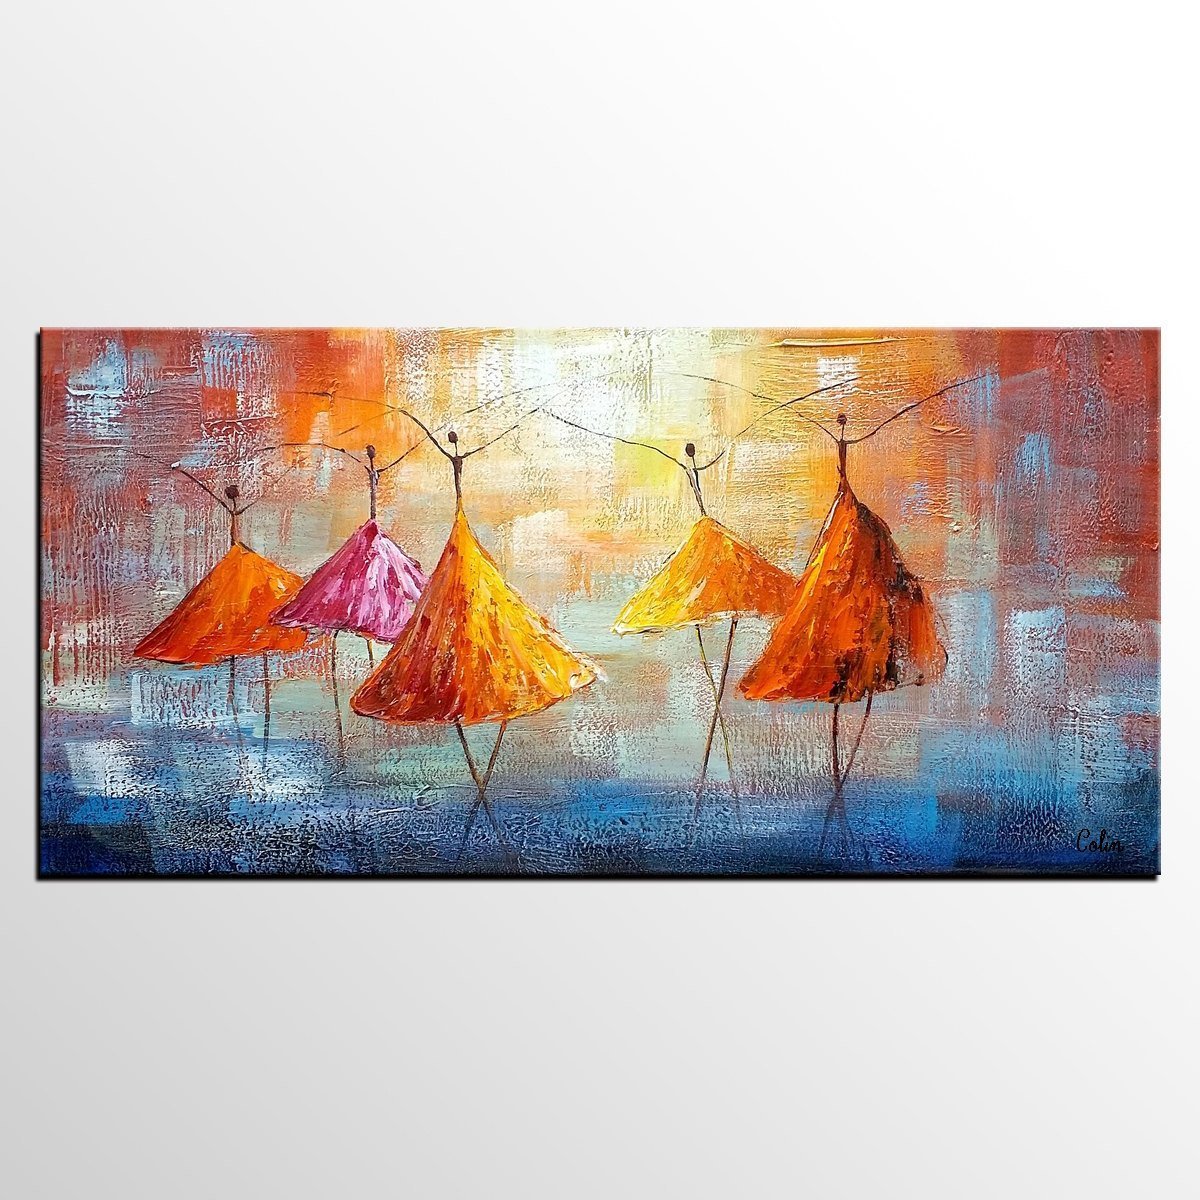 Abstract Artwork, Contemporary Artwork, Ballet Dancer Painting, Painting for Sale, Original Painting-Grace Painting Crafts